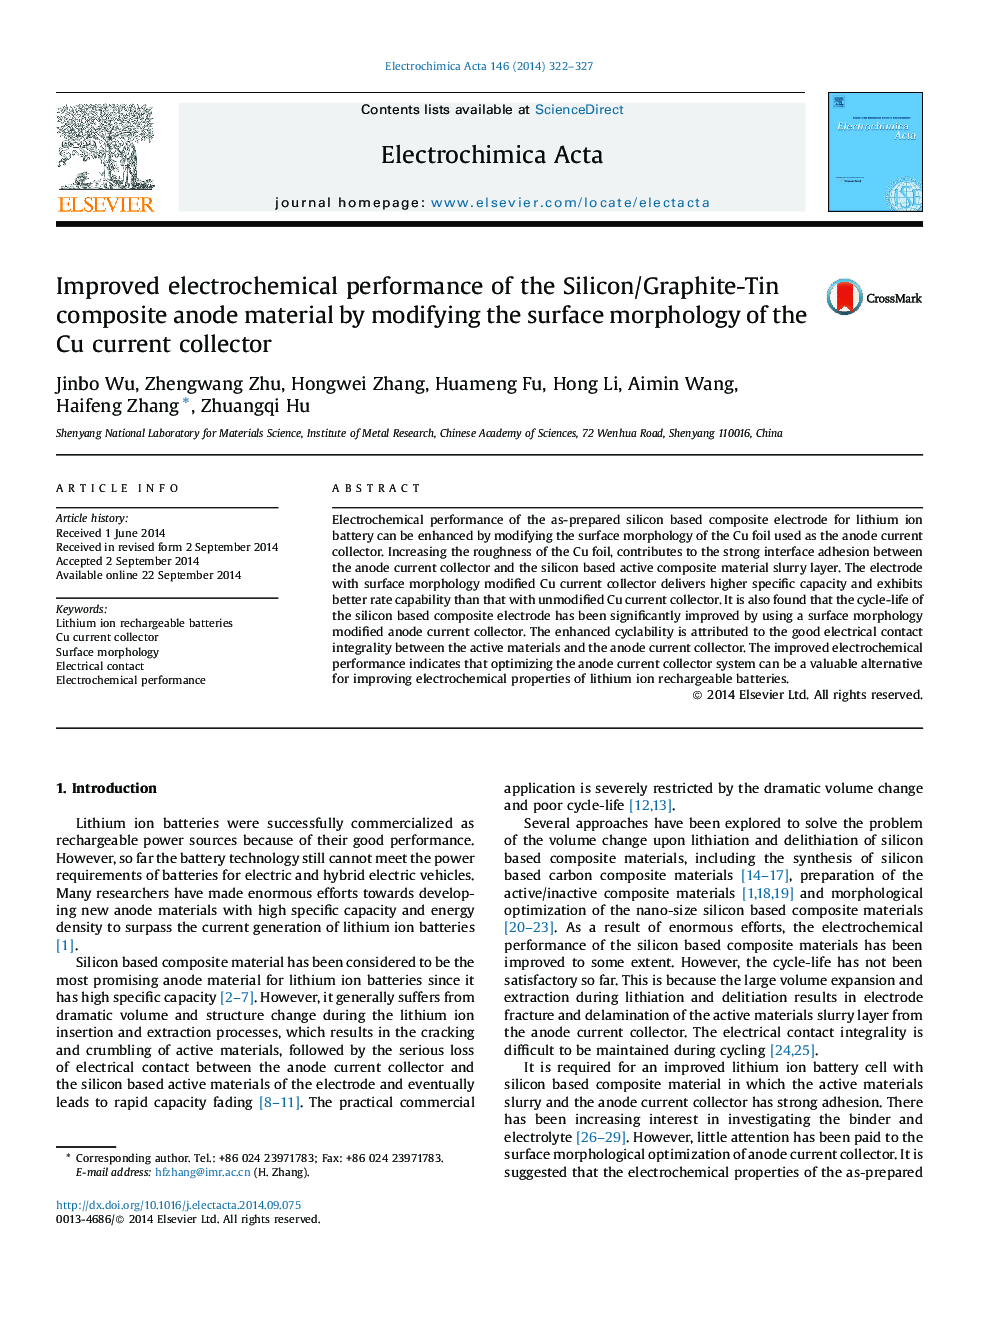 Improved electrochemical performance of the Silicon/Graphite-Tin composite anode material by modifying the surface morphology of the Cu current collector